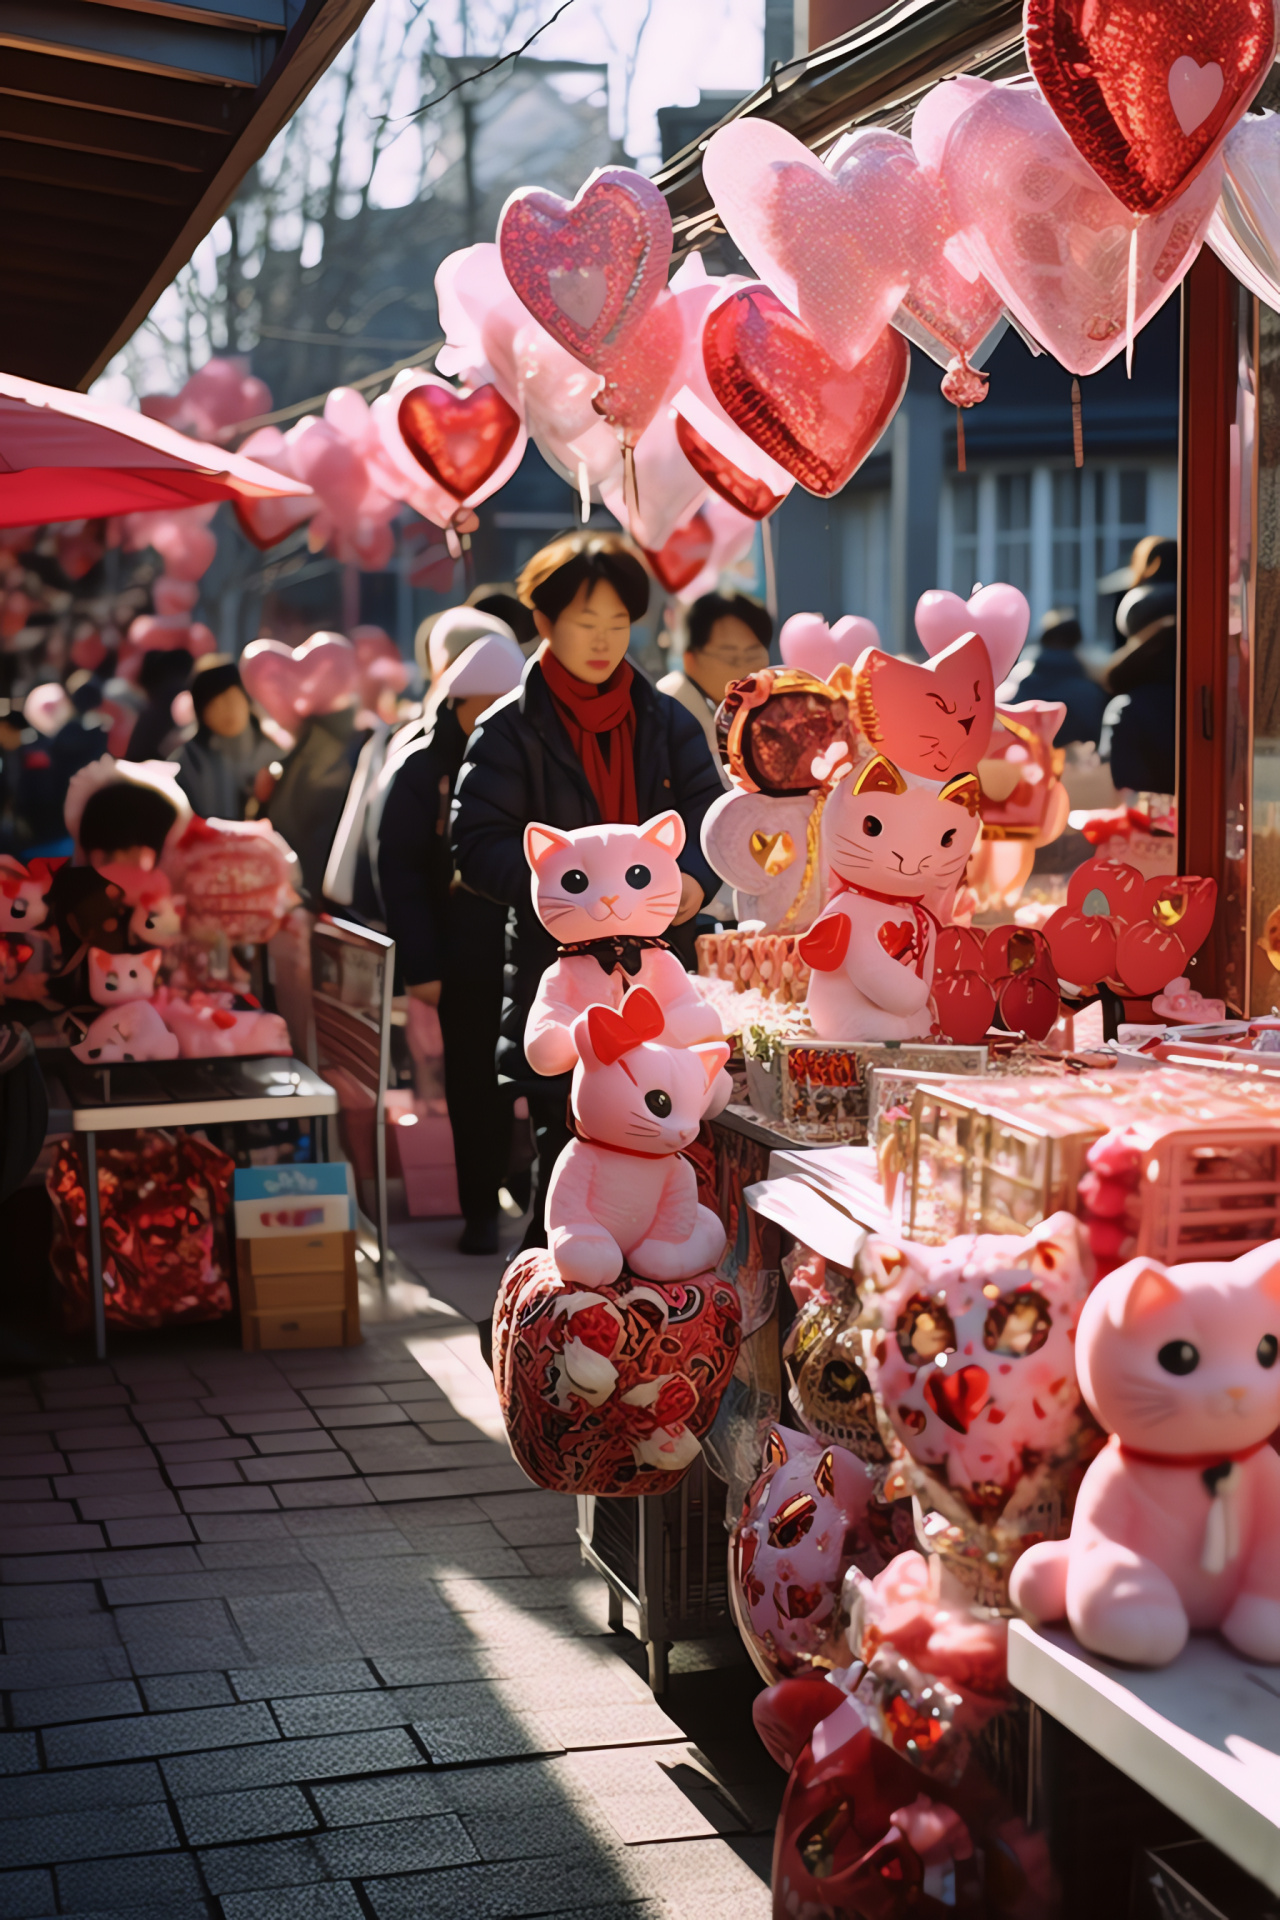 Marketplace romance, Feline affections, Confectionery hearts, Fragrant florals, Valentine commerce, HD Phone Image